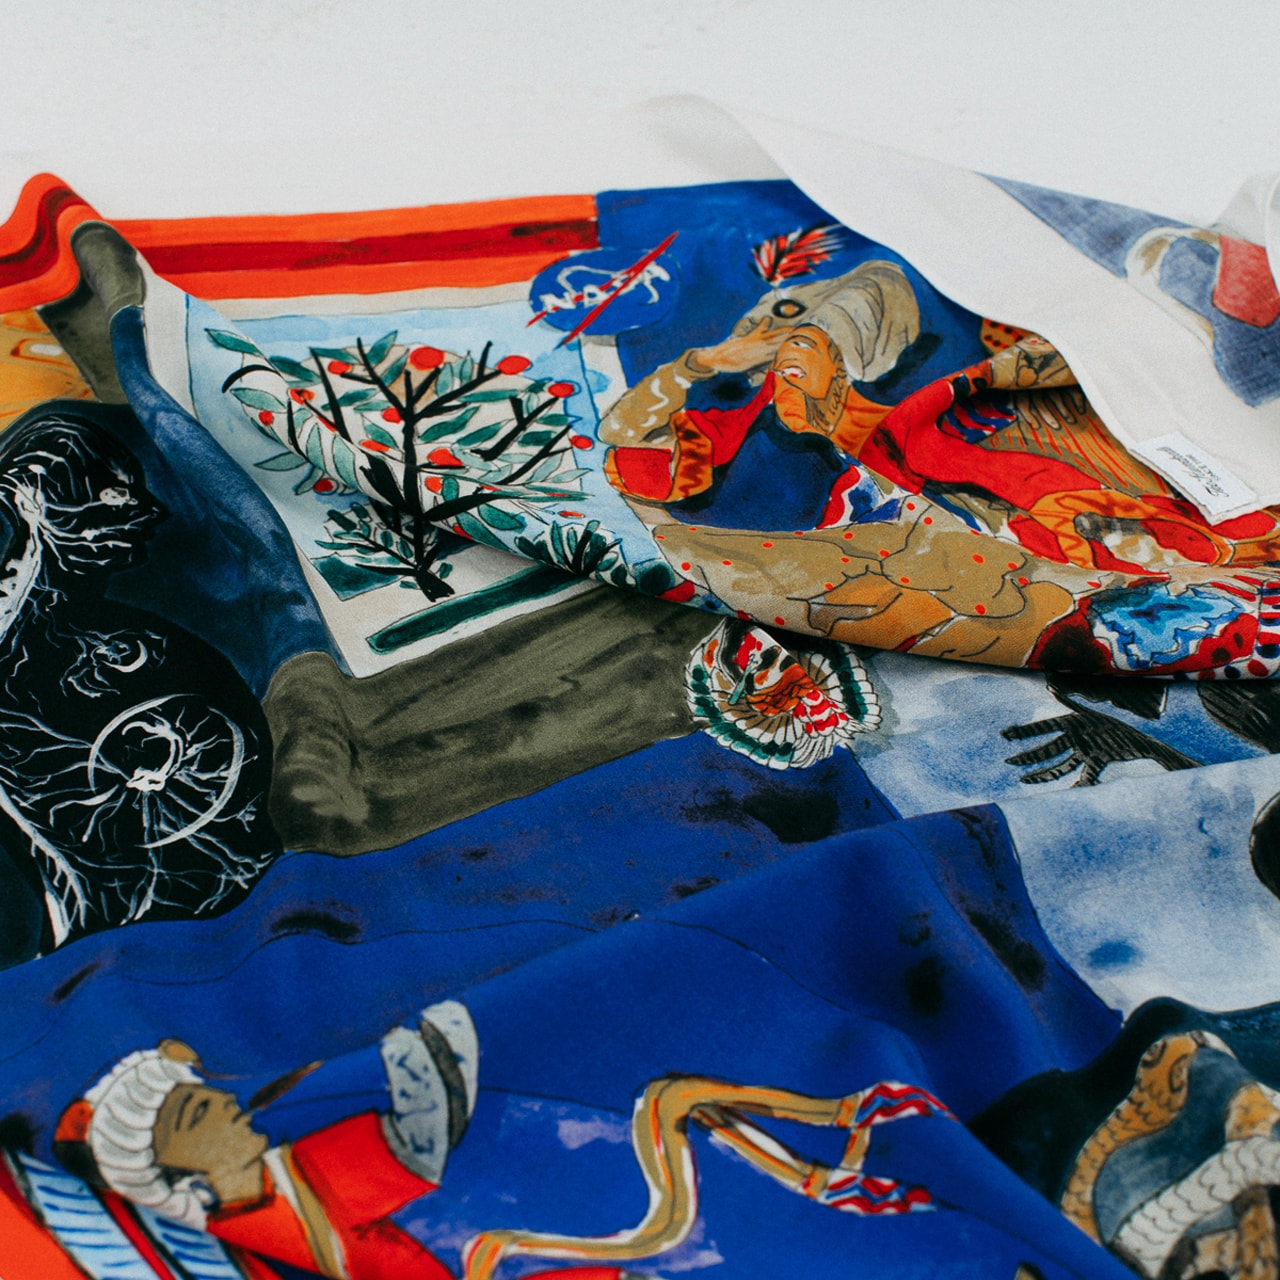 The Hundreds Artist Series Bandanas Collection charity Anna Weyant, Mike Giant, Amir H. Fallah, Greg Ito donation relief foundation design